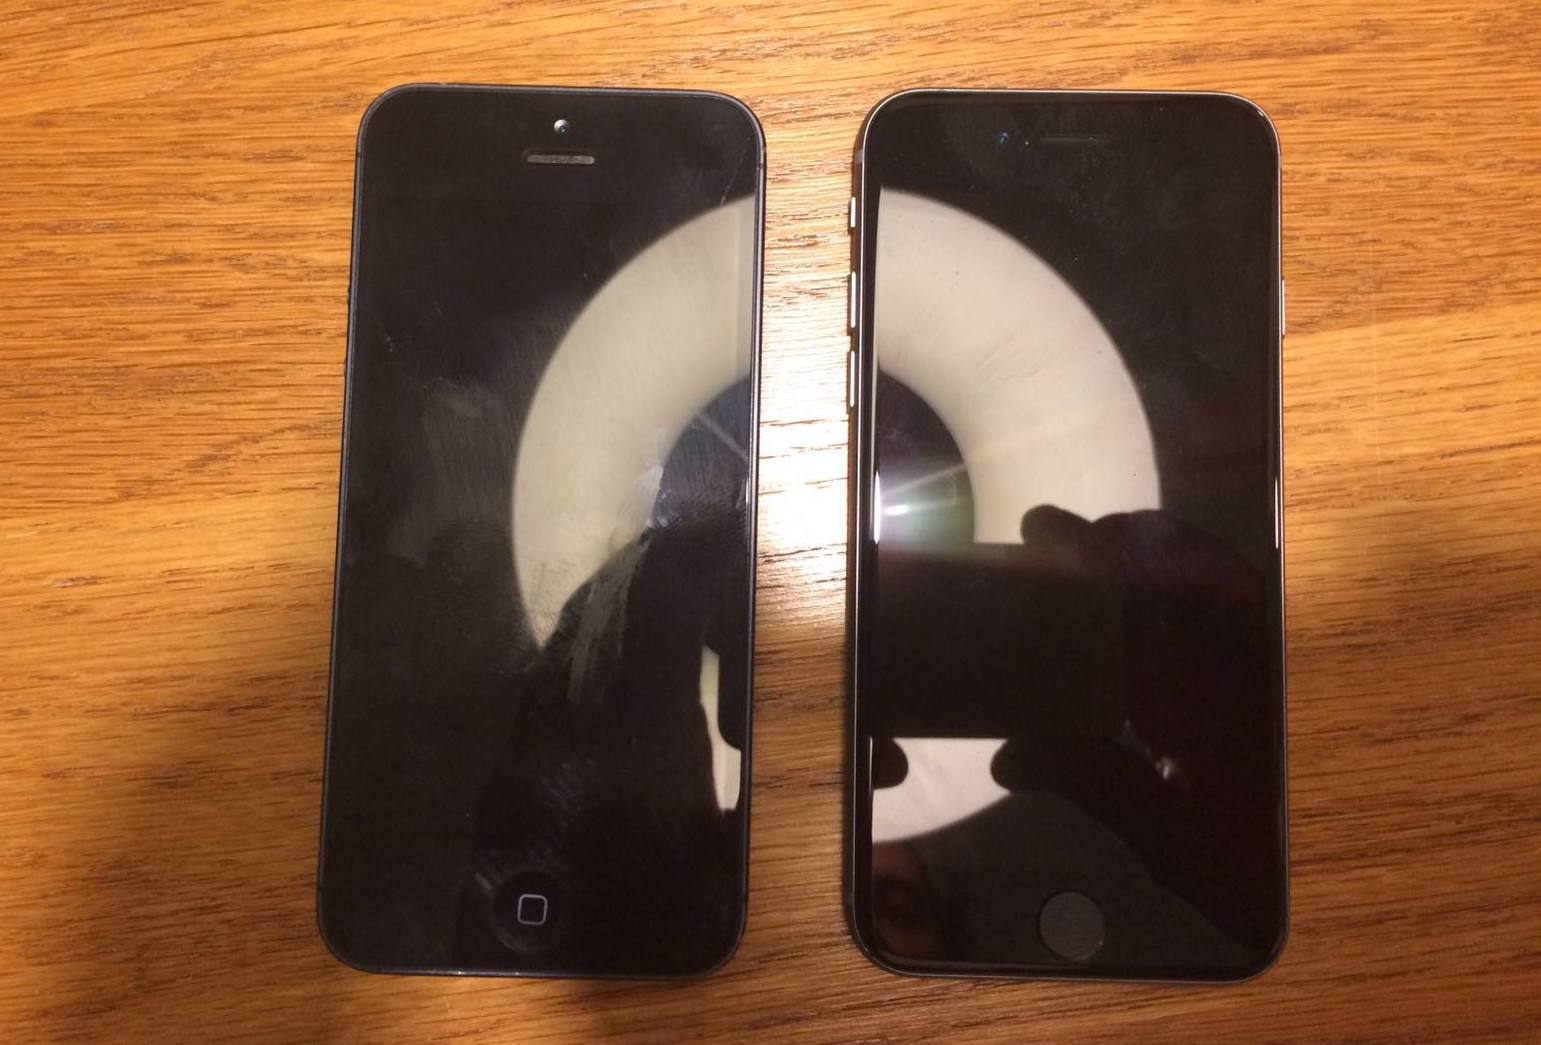 iPhone 5se (aka 6c) allegedly photographed next to an iPhone 5